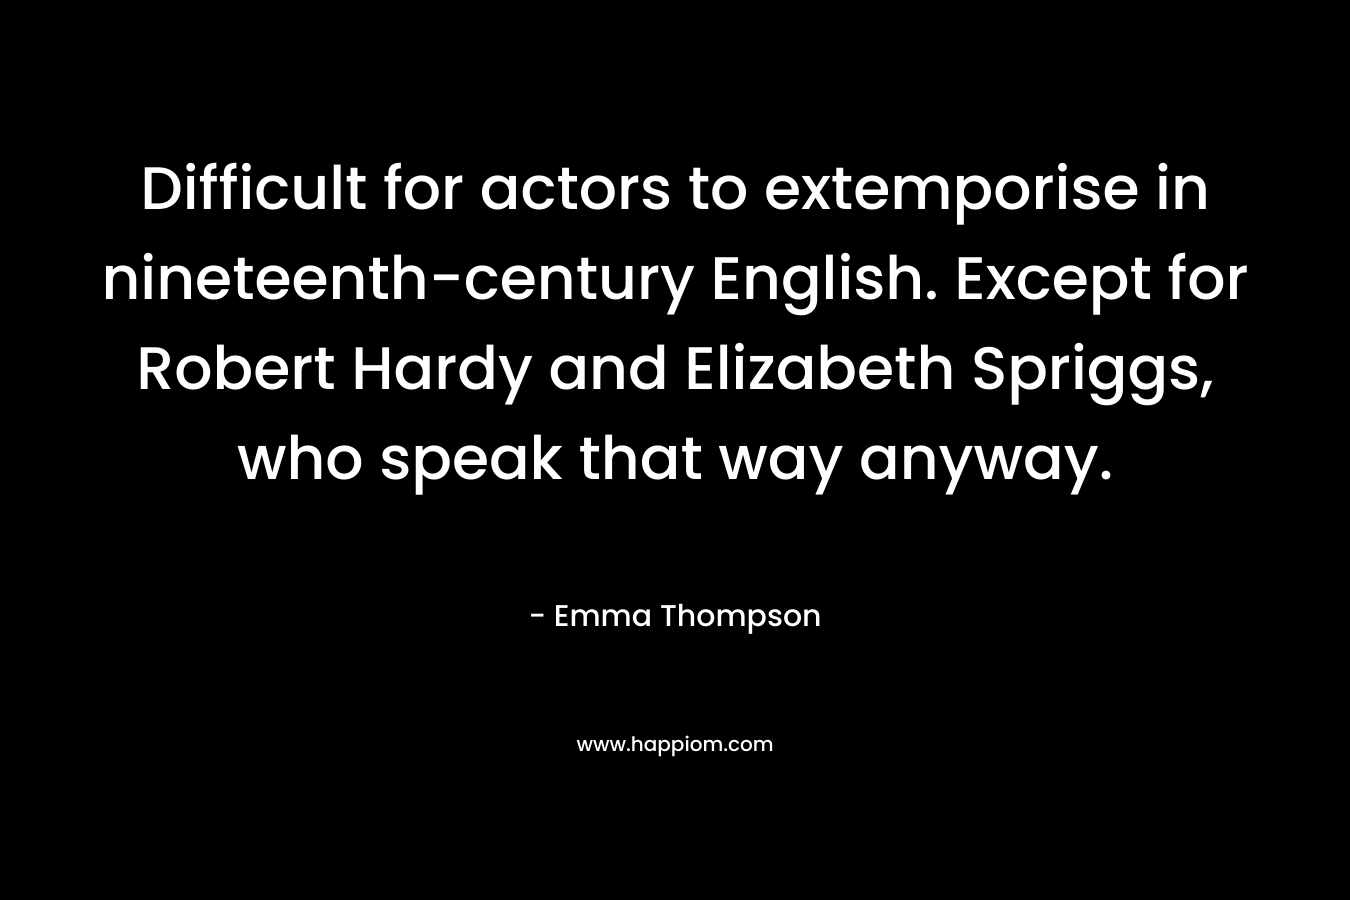 Difficult for actors to extemporise in nineteenth-century English. Except for Robert Hardy and Elizabeth Spriggs, who speak that way anyway. – Emma Thompson